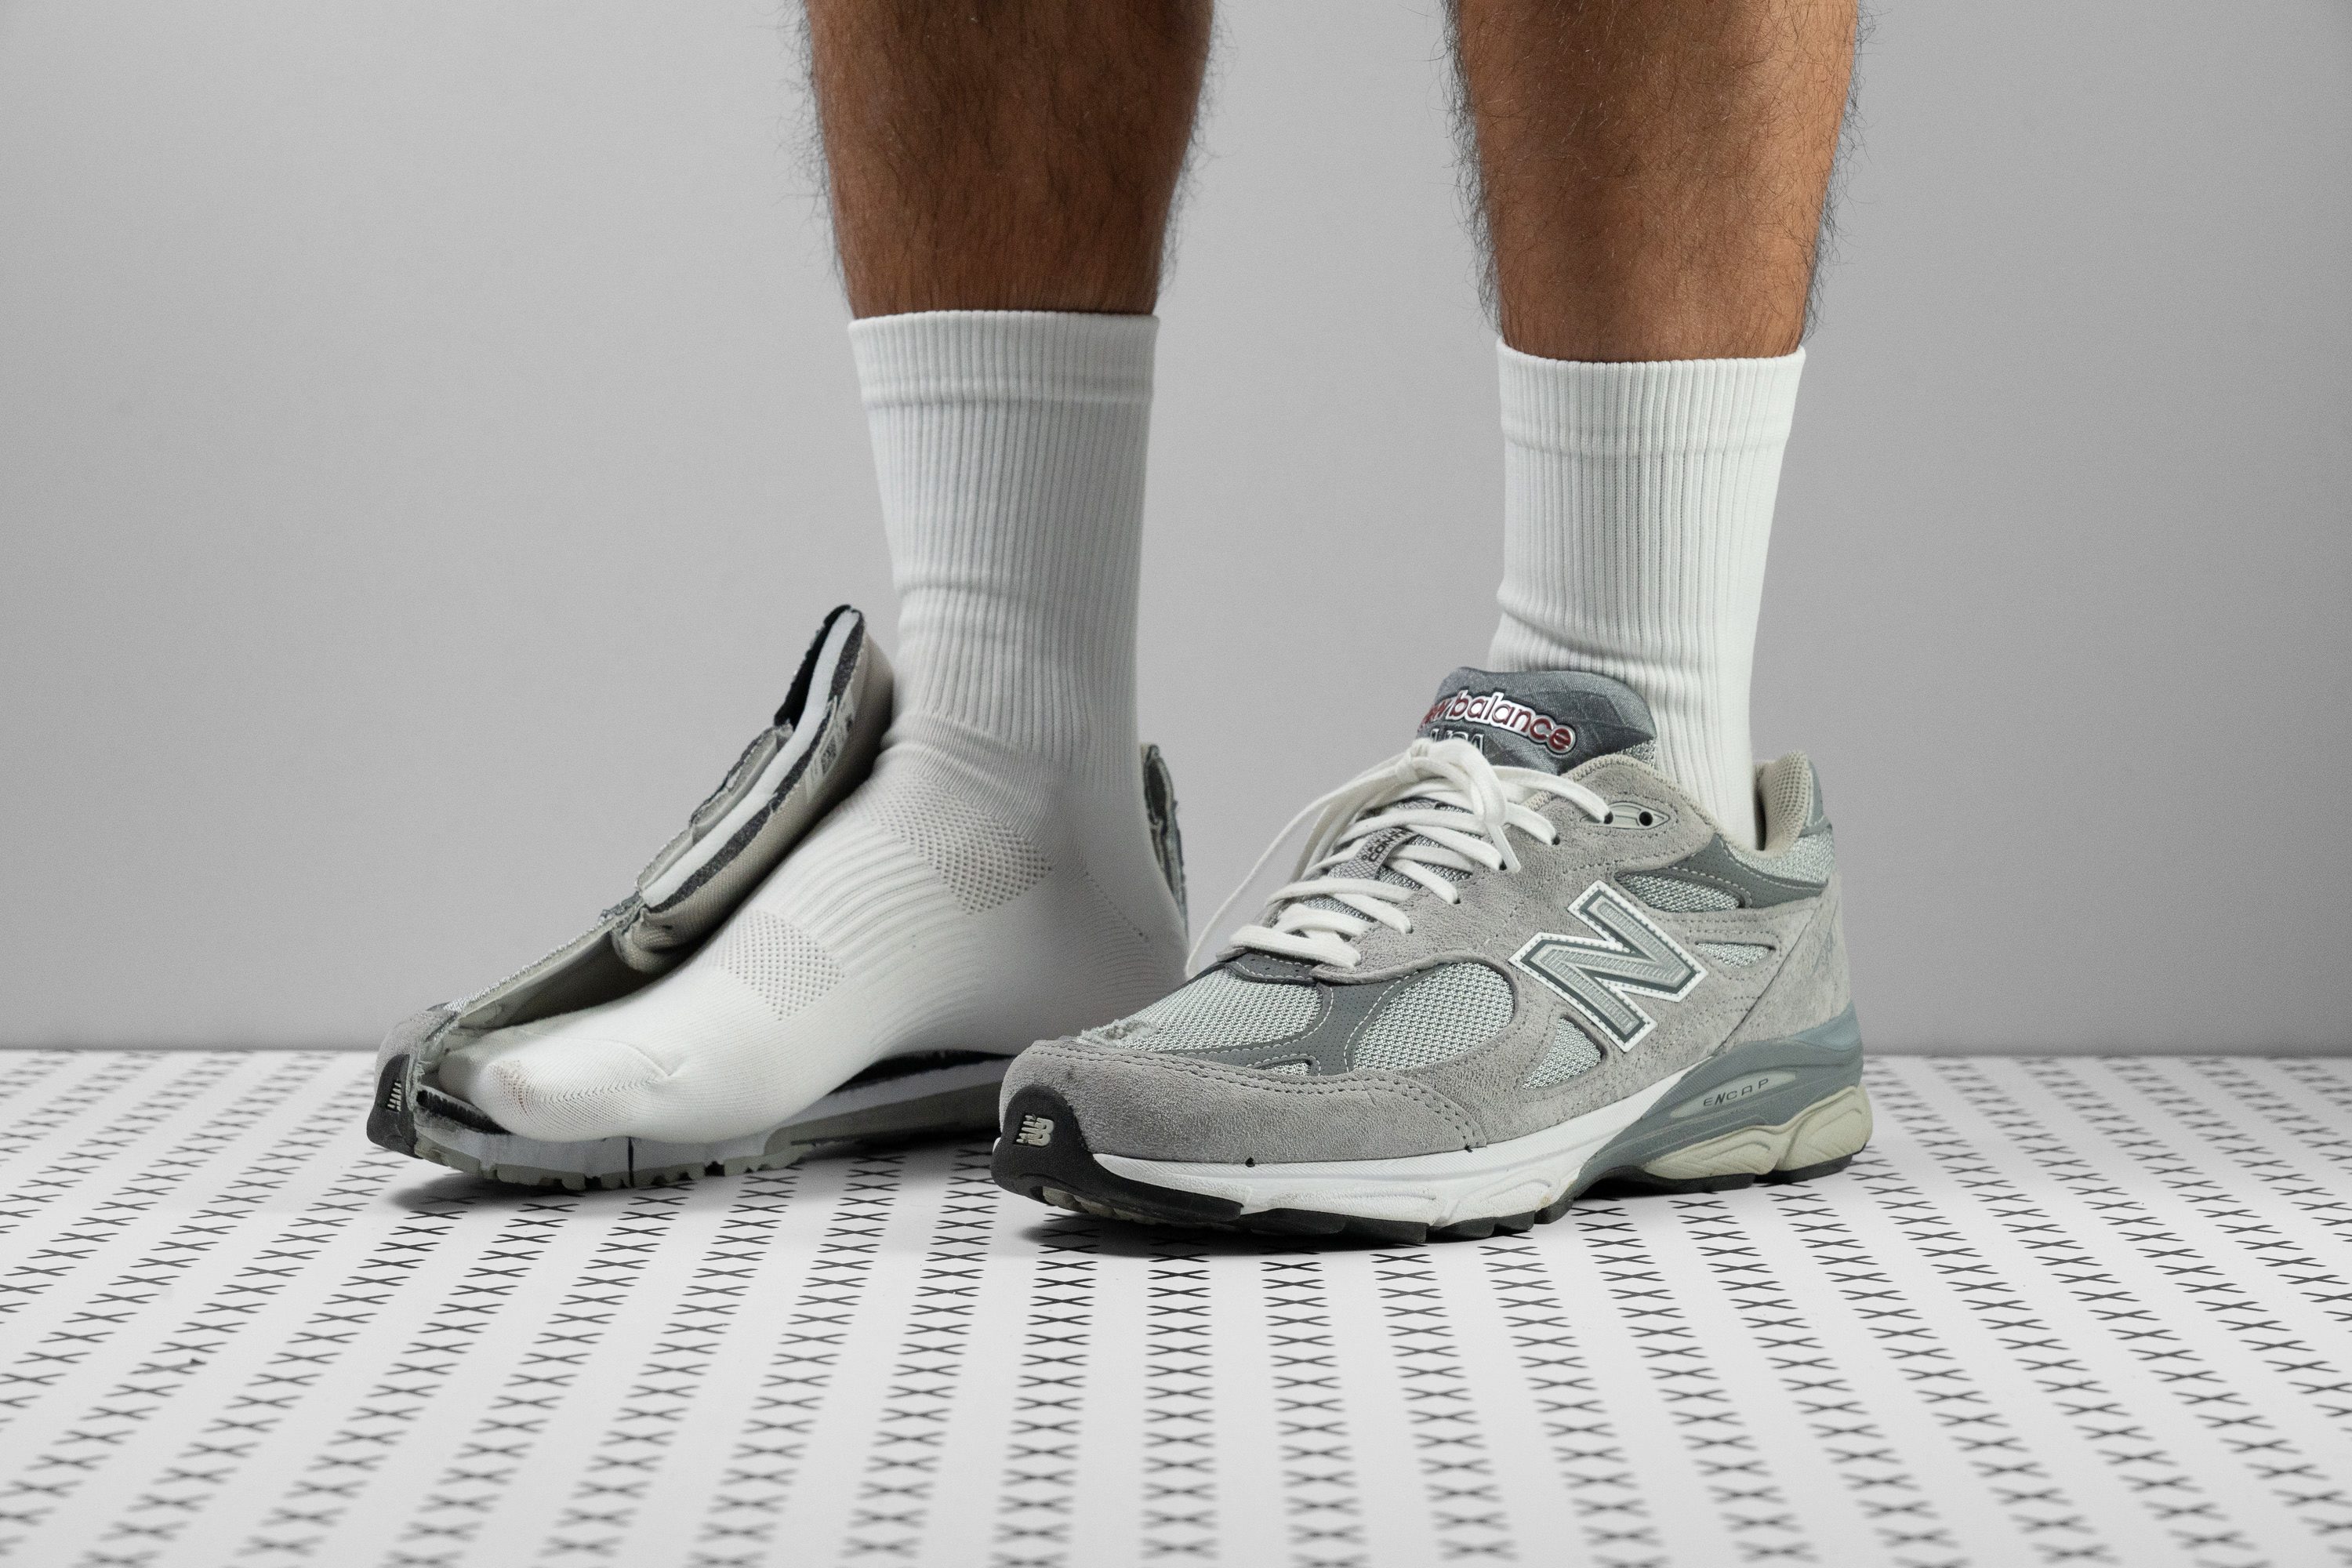 NEW BALANCE 1906 metallic faux leather-trimmed mesh sneakers